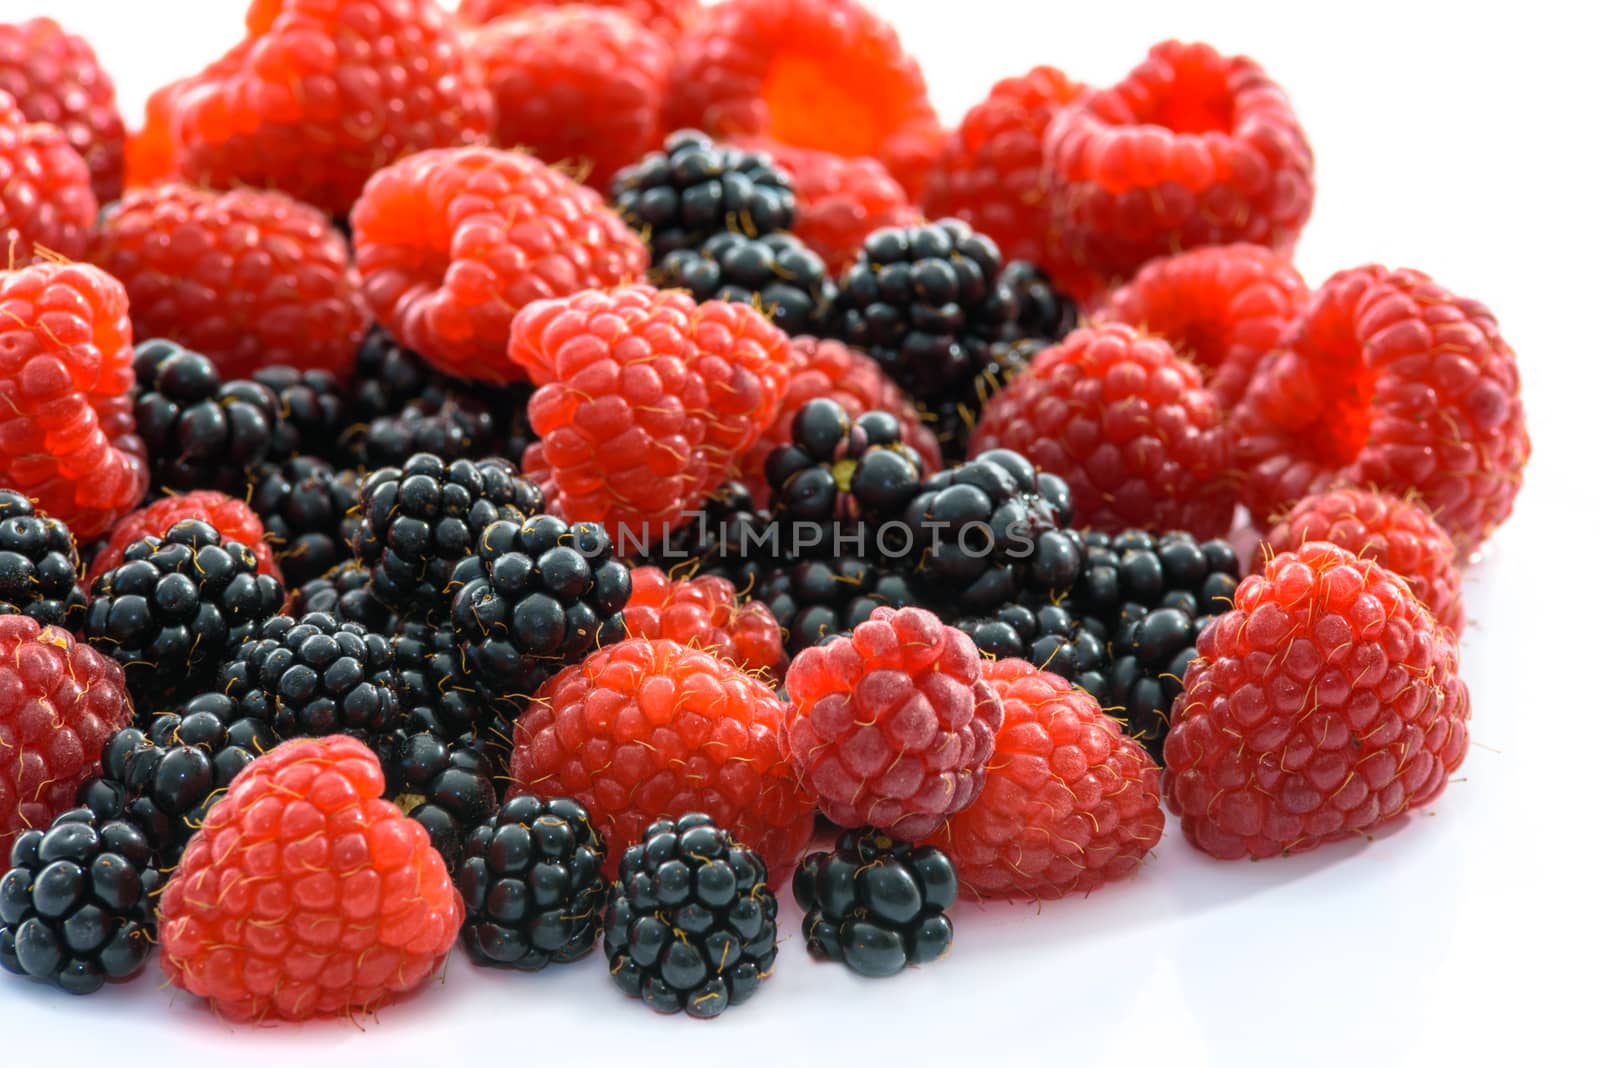 Delicious fruits of the forest by wdnet_studio